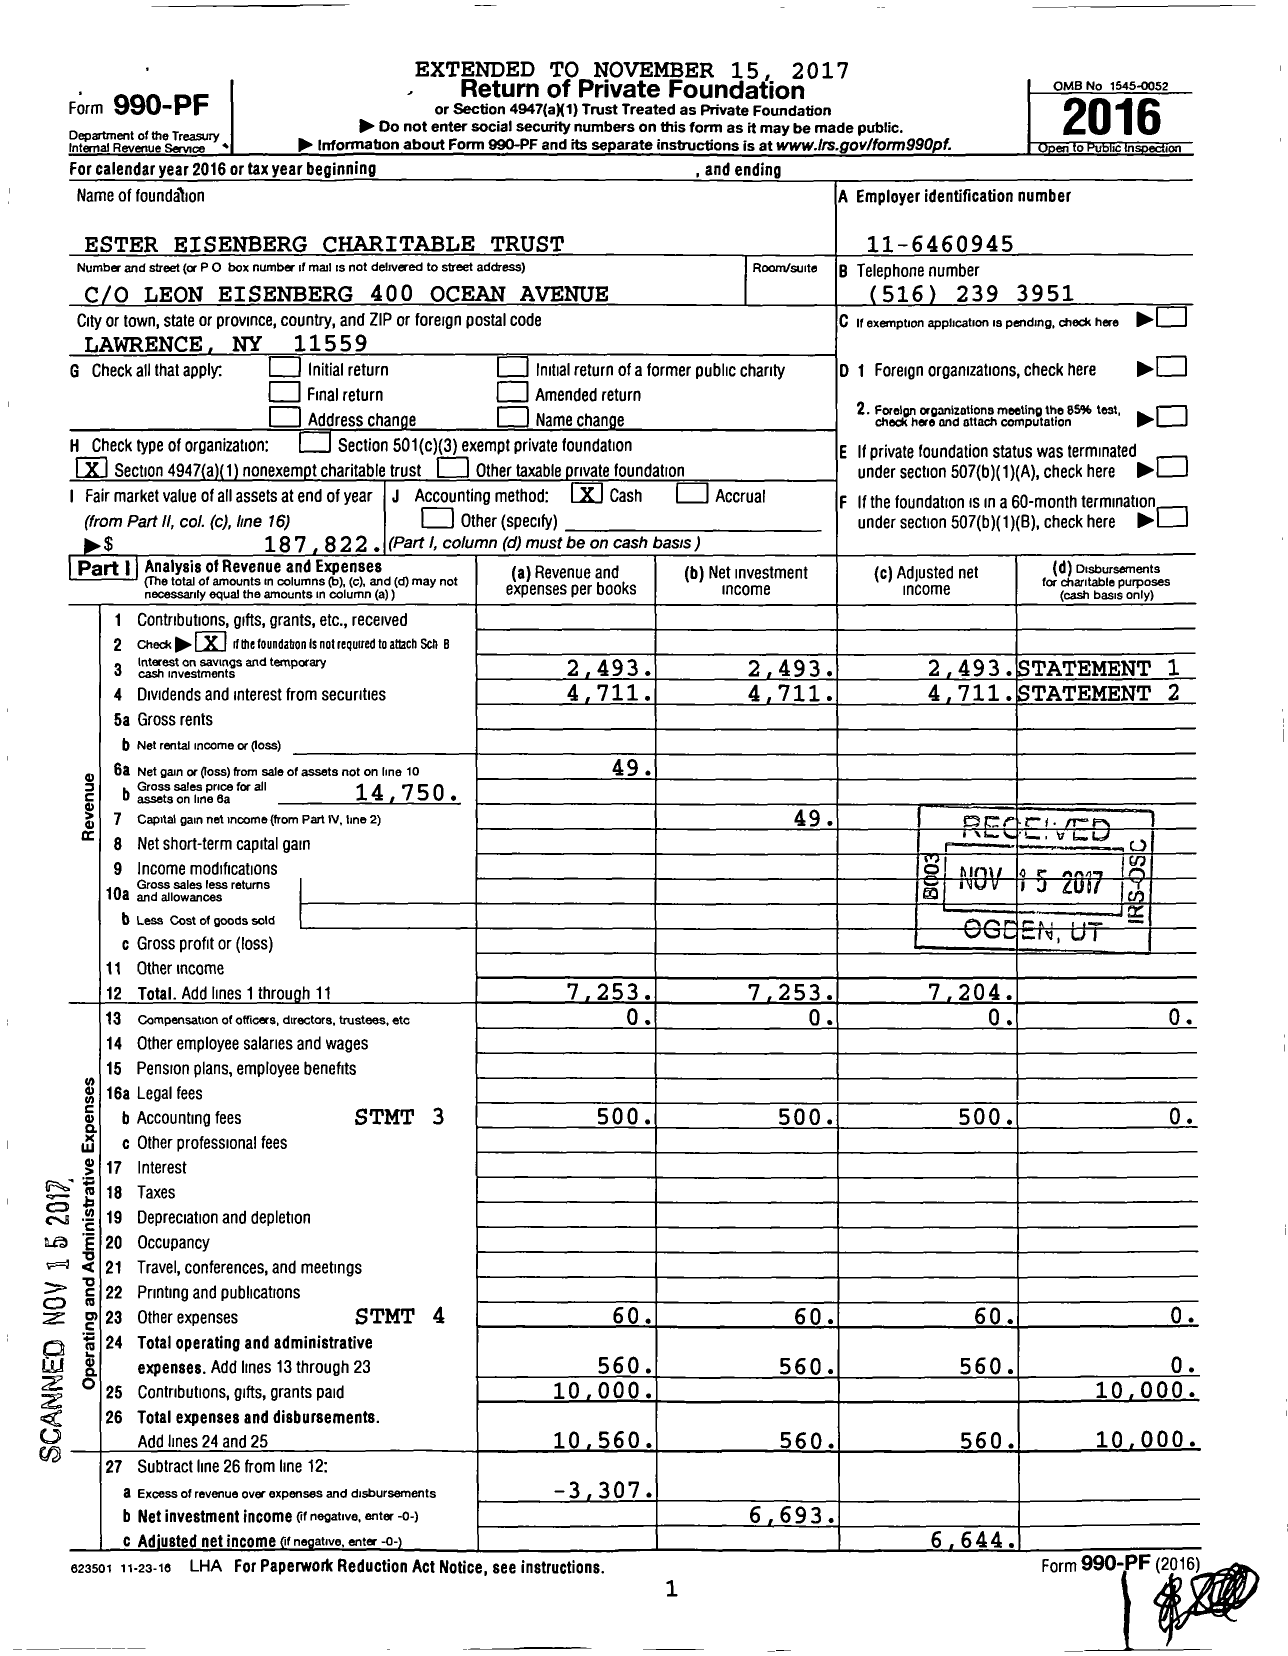 Image of first page of 2016 Form 990PF for Ester Eisenberg Charitable Trust